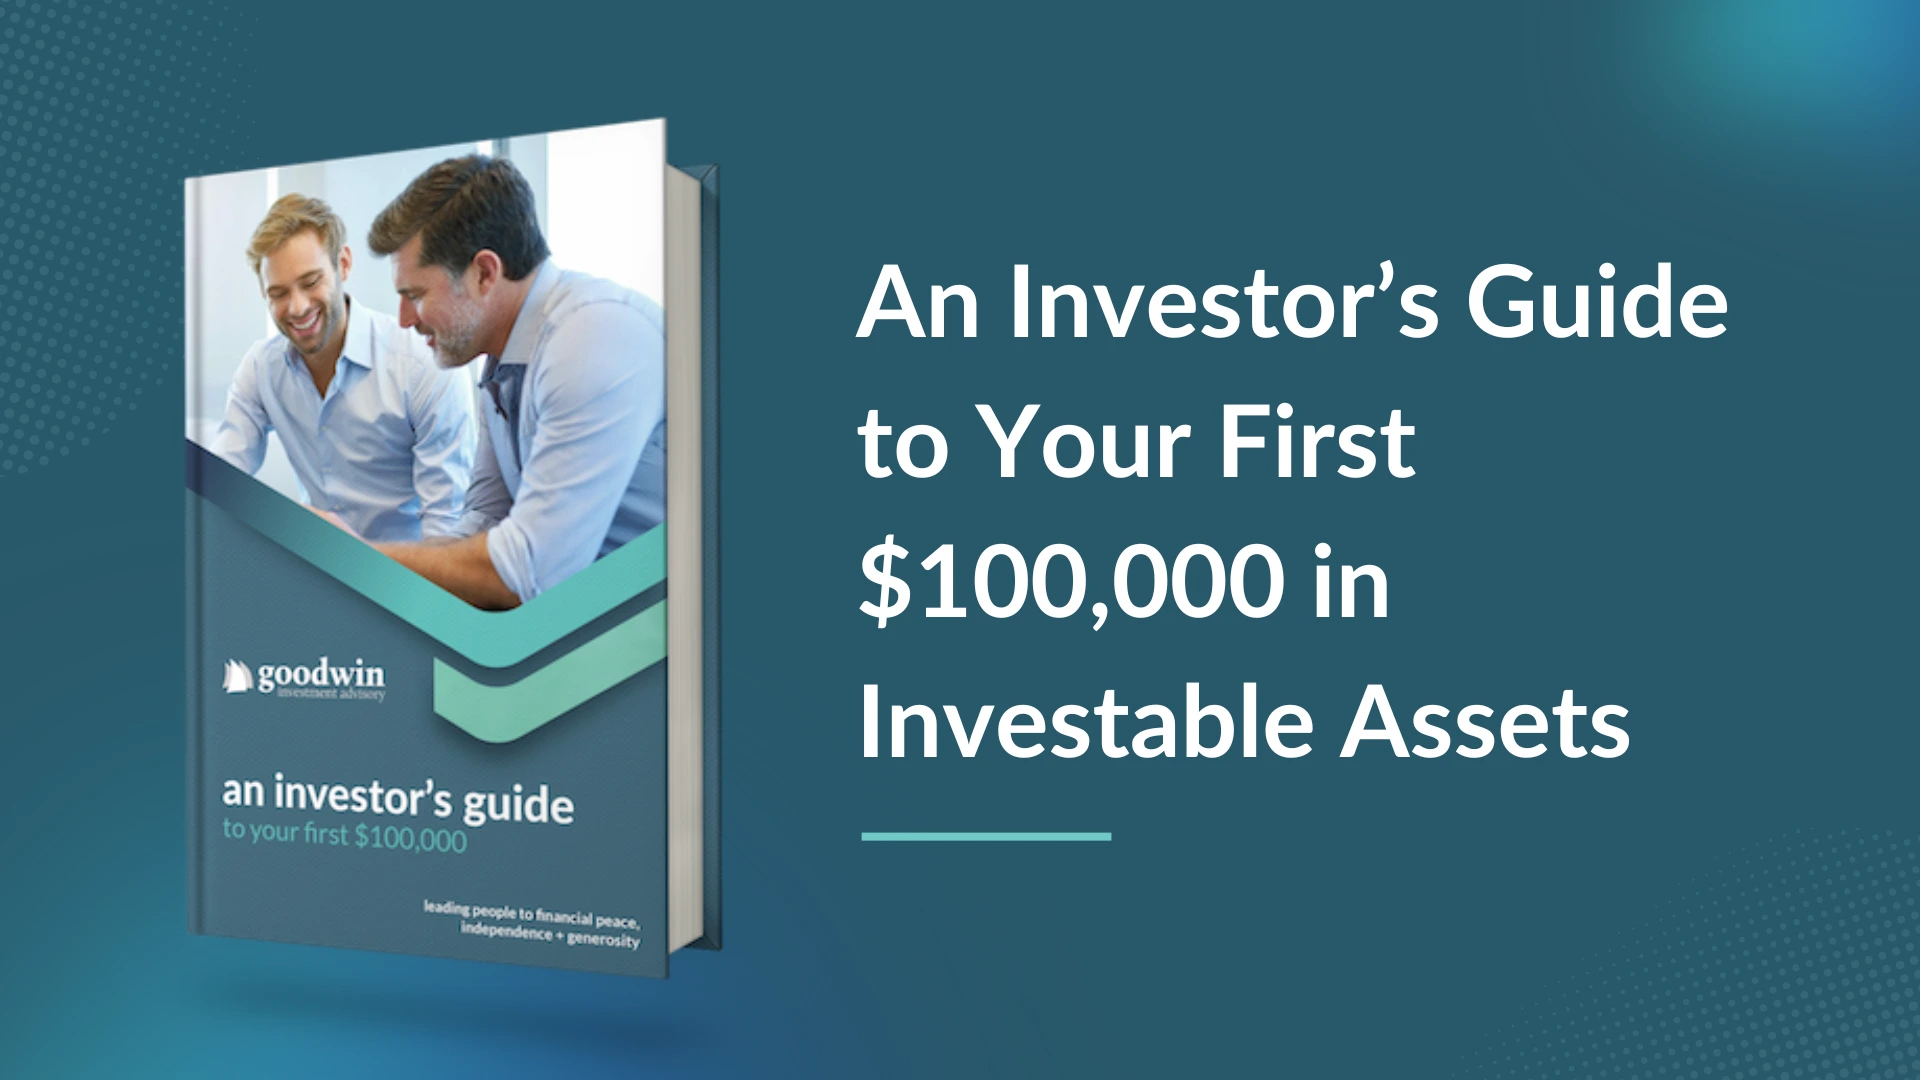 An Investor’s Guide to Your First $100,000 in Investable Assets